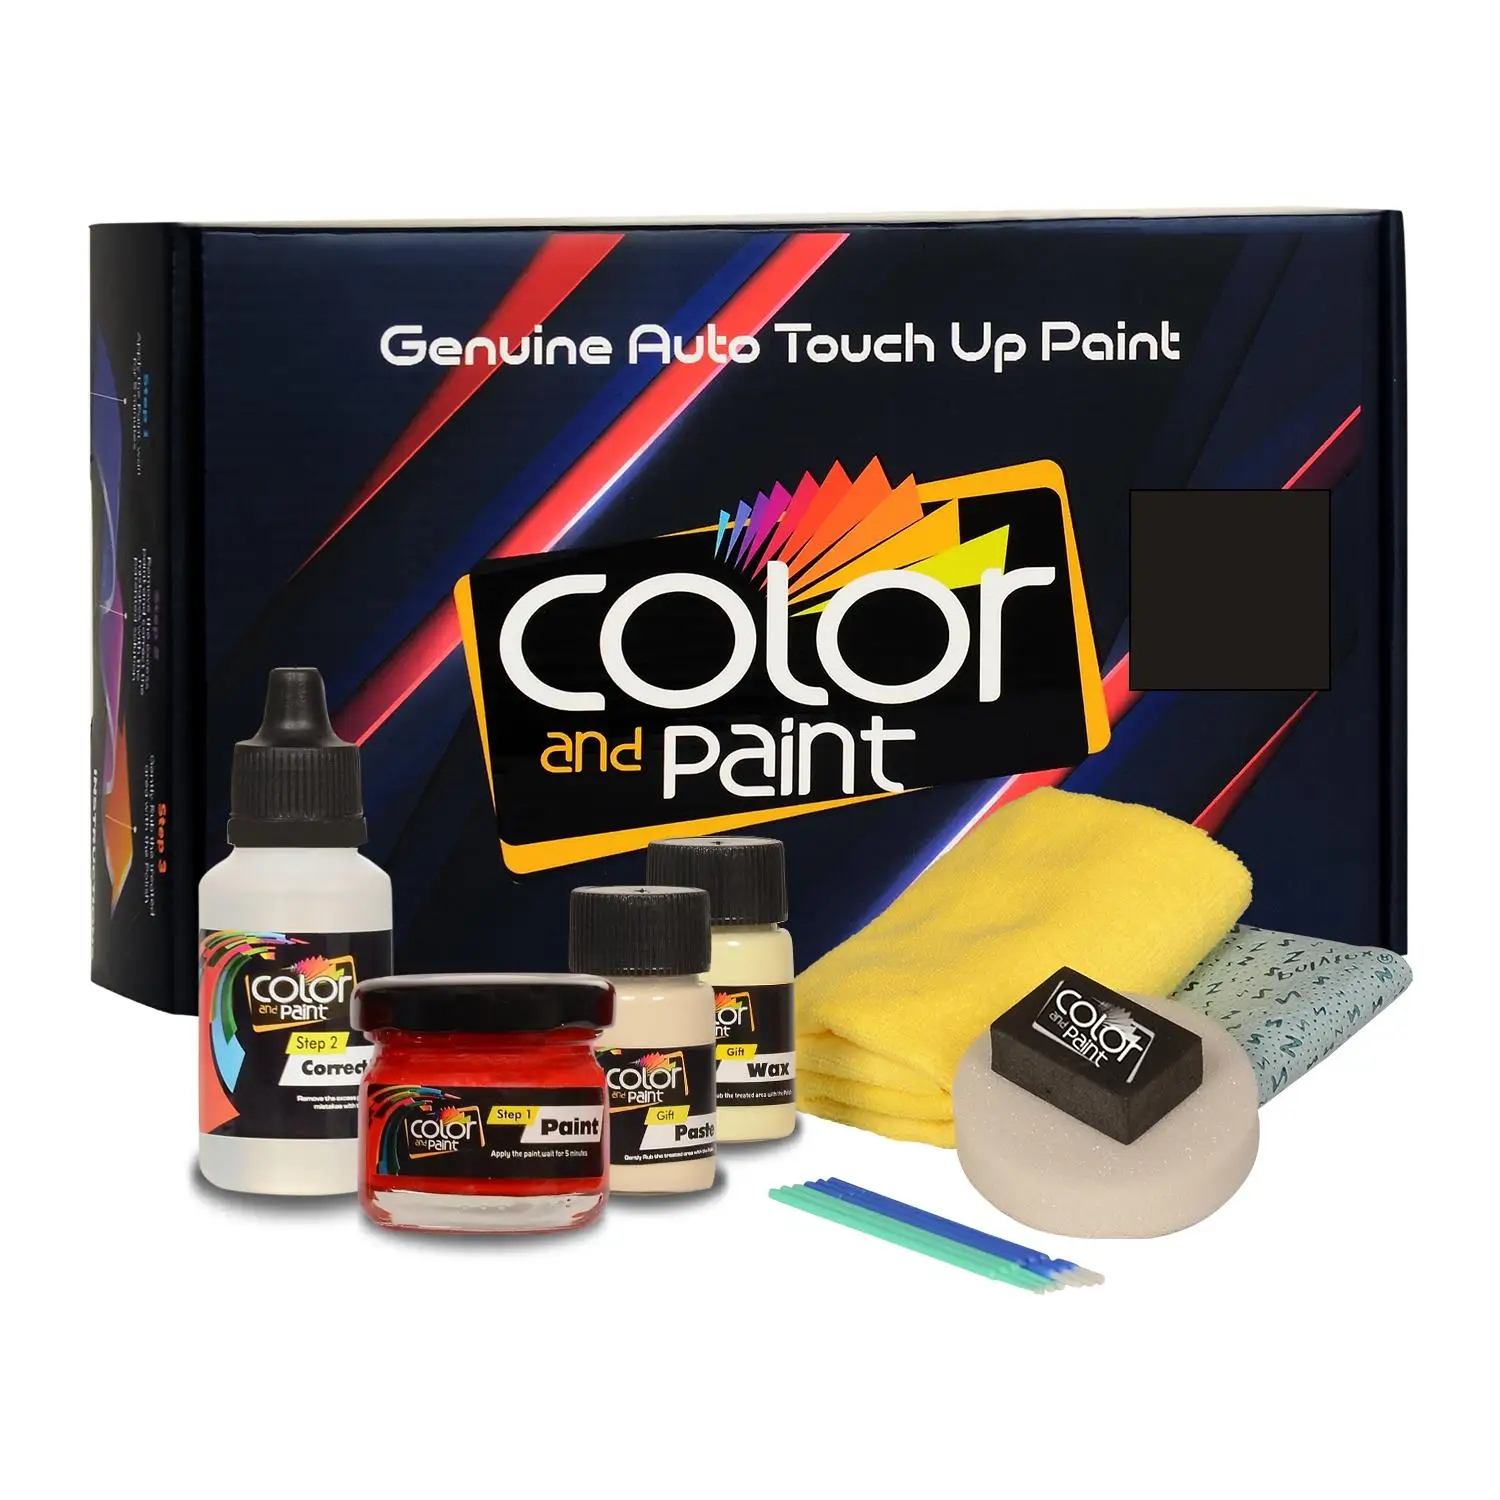 

Color and Paint compatible with Cadillac Automotive Touch Up Paint - MEDIUM DARK NEUTRAL SEMI-GLOSS-WA9648-basic Care